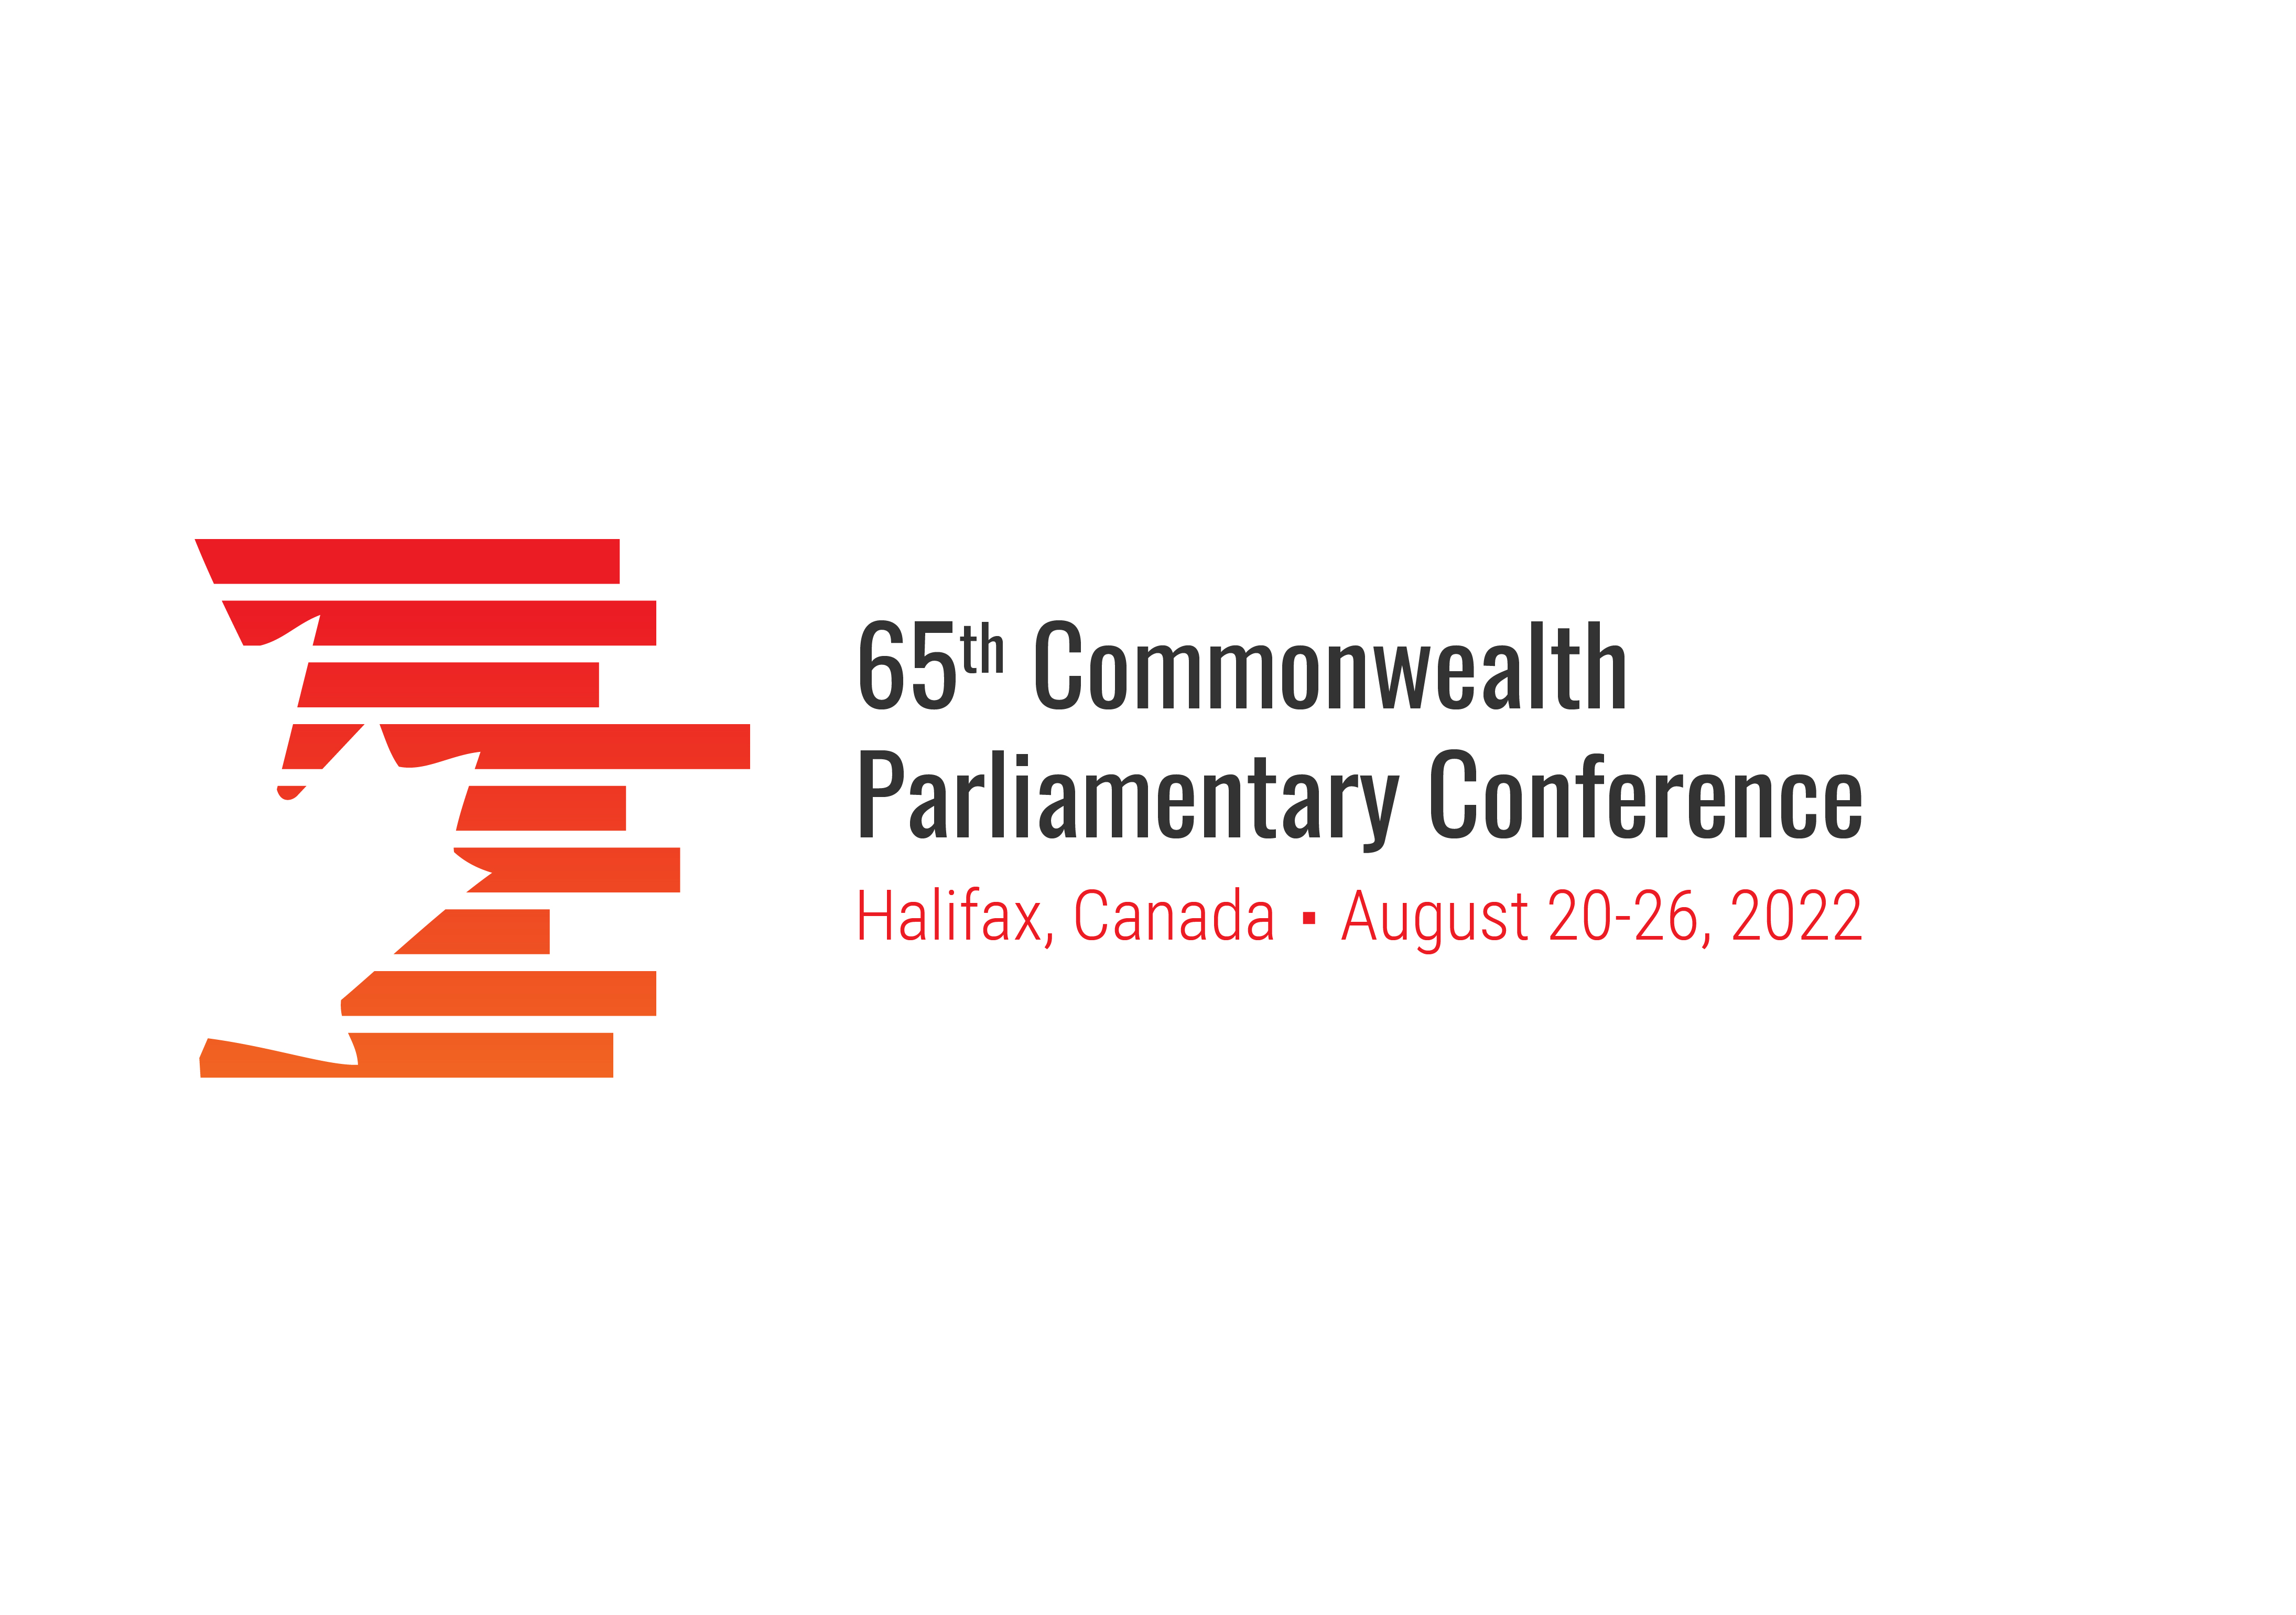 65th Commonwealth Parliamentary Conference, Halifax, Canada